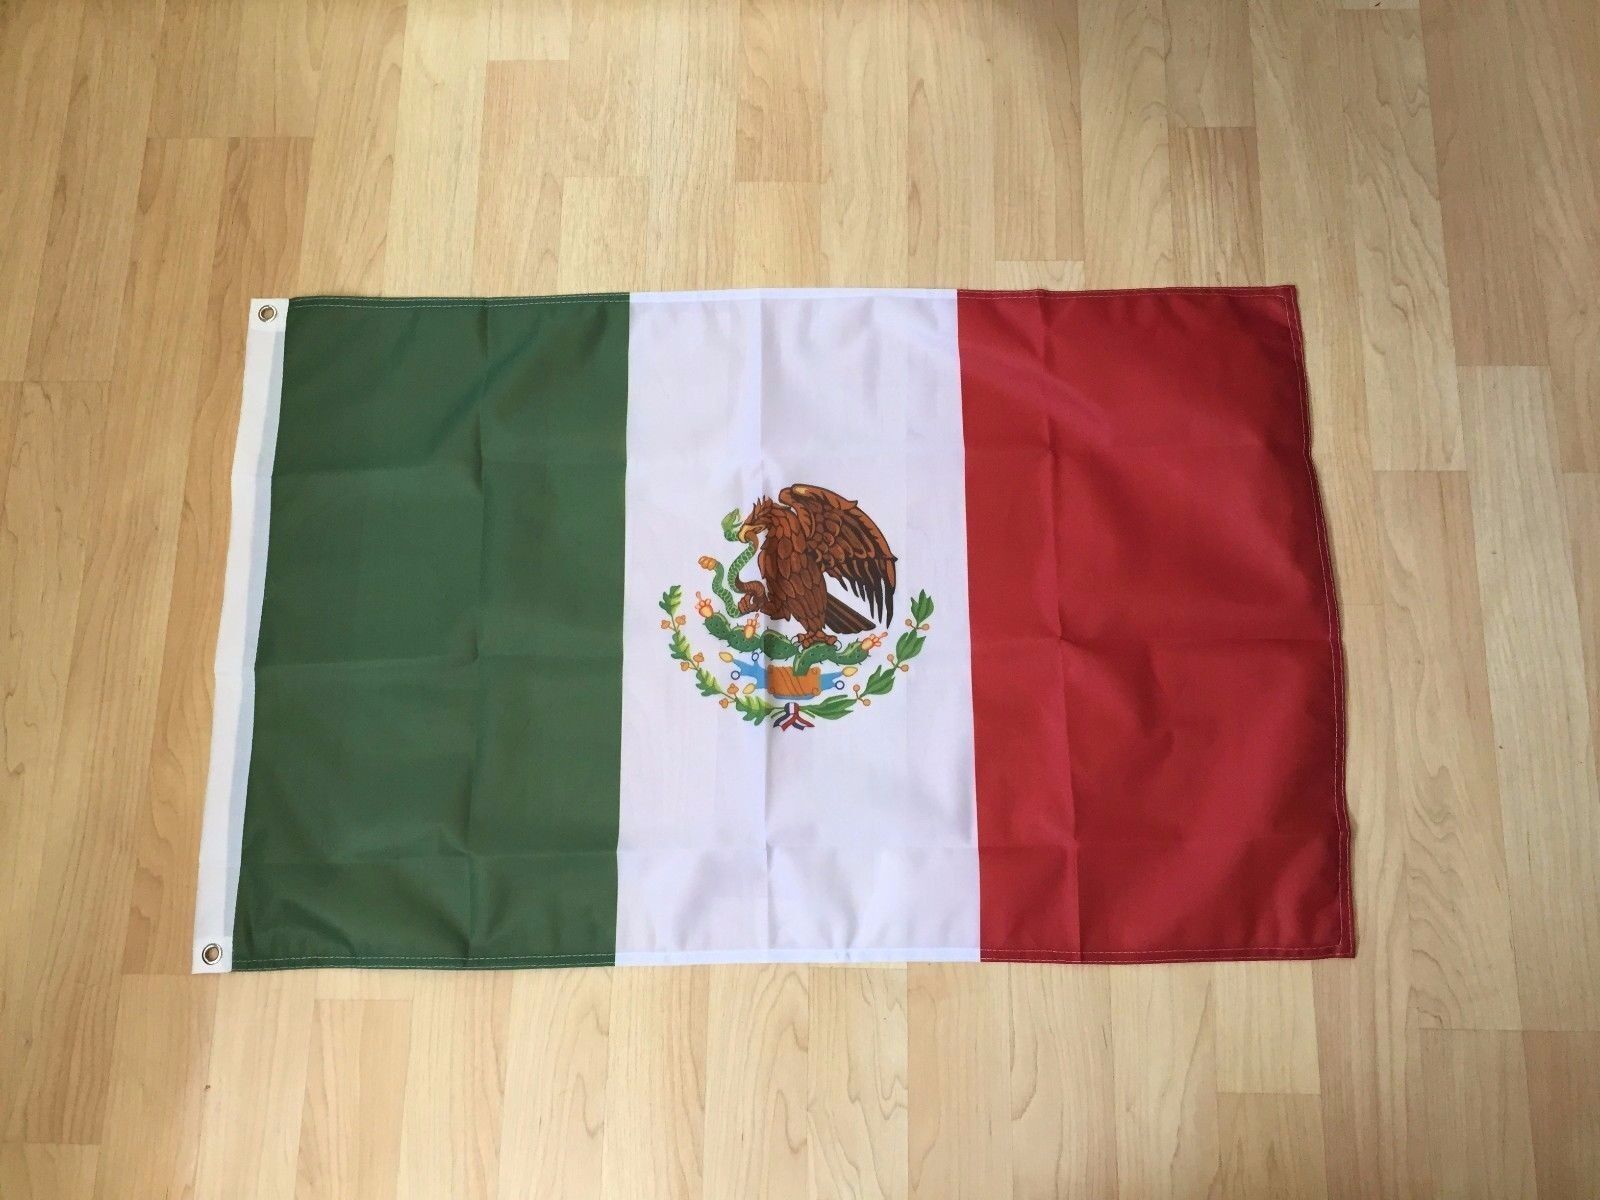 2X3 MEXICO FLAG MEXICAN PRIDE FLAGS NEW 2'X3' FOOT ON SALE